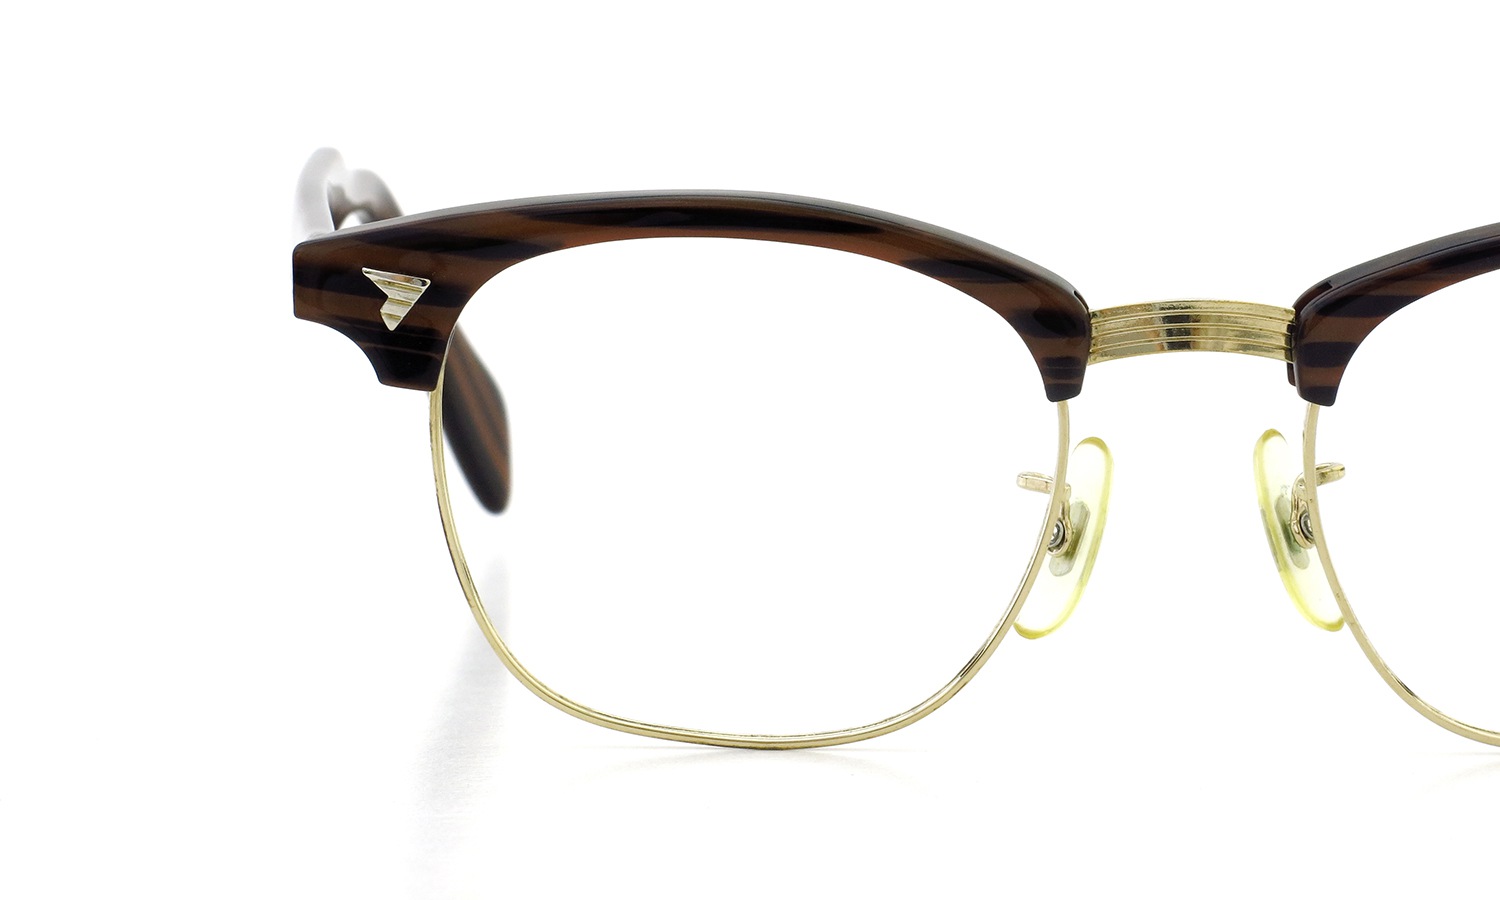 American Optical Vintage Malcolm-X type:2 ウイング鋲 Wood/Gold 48-22